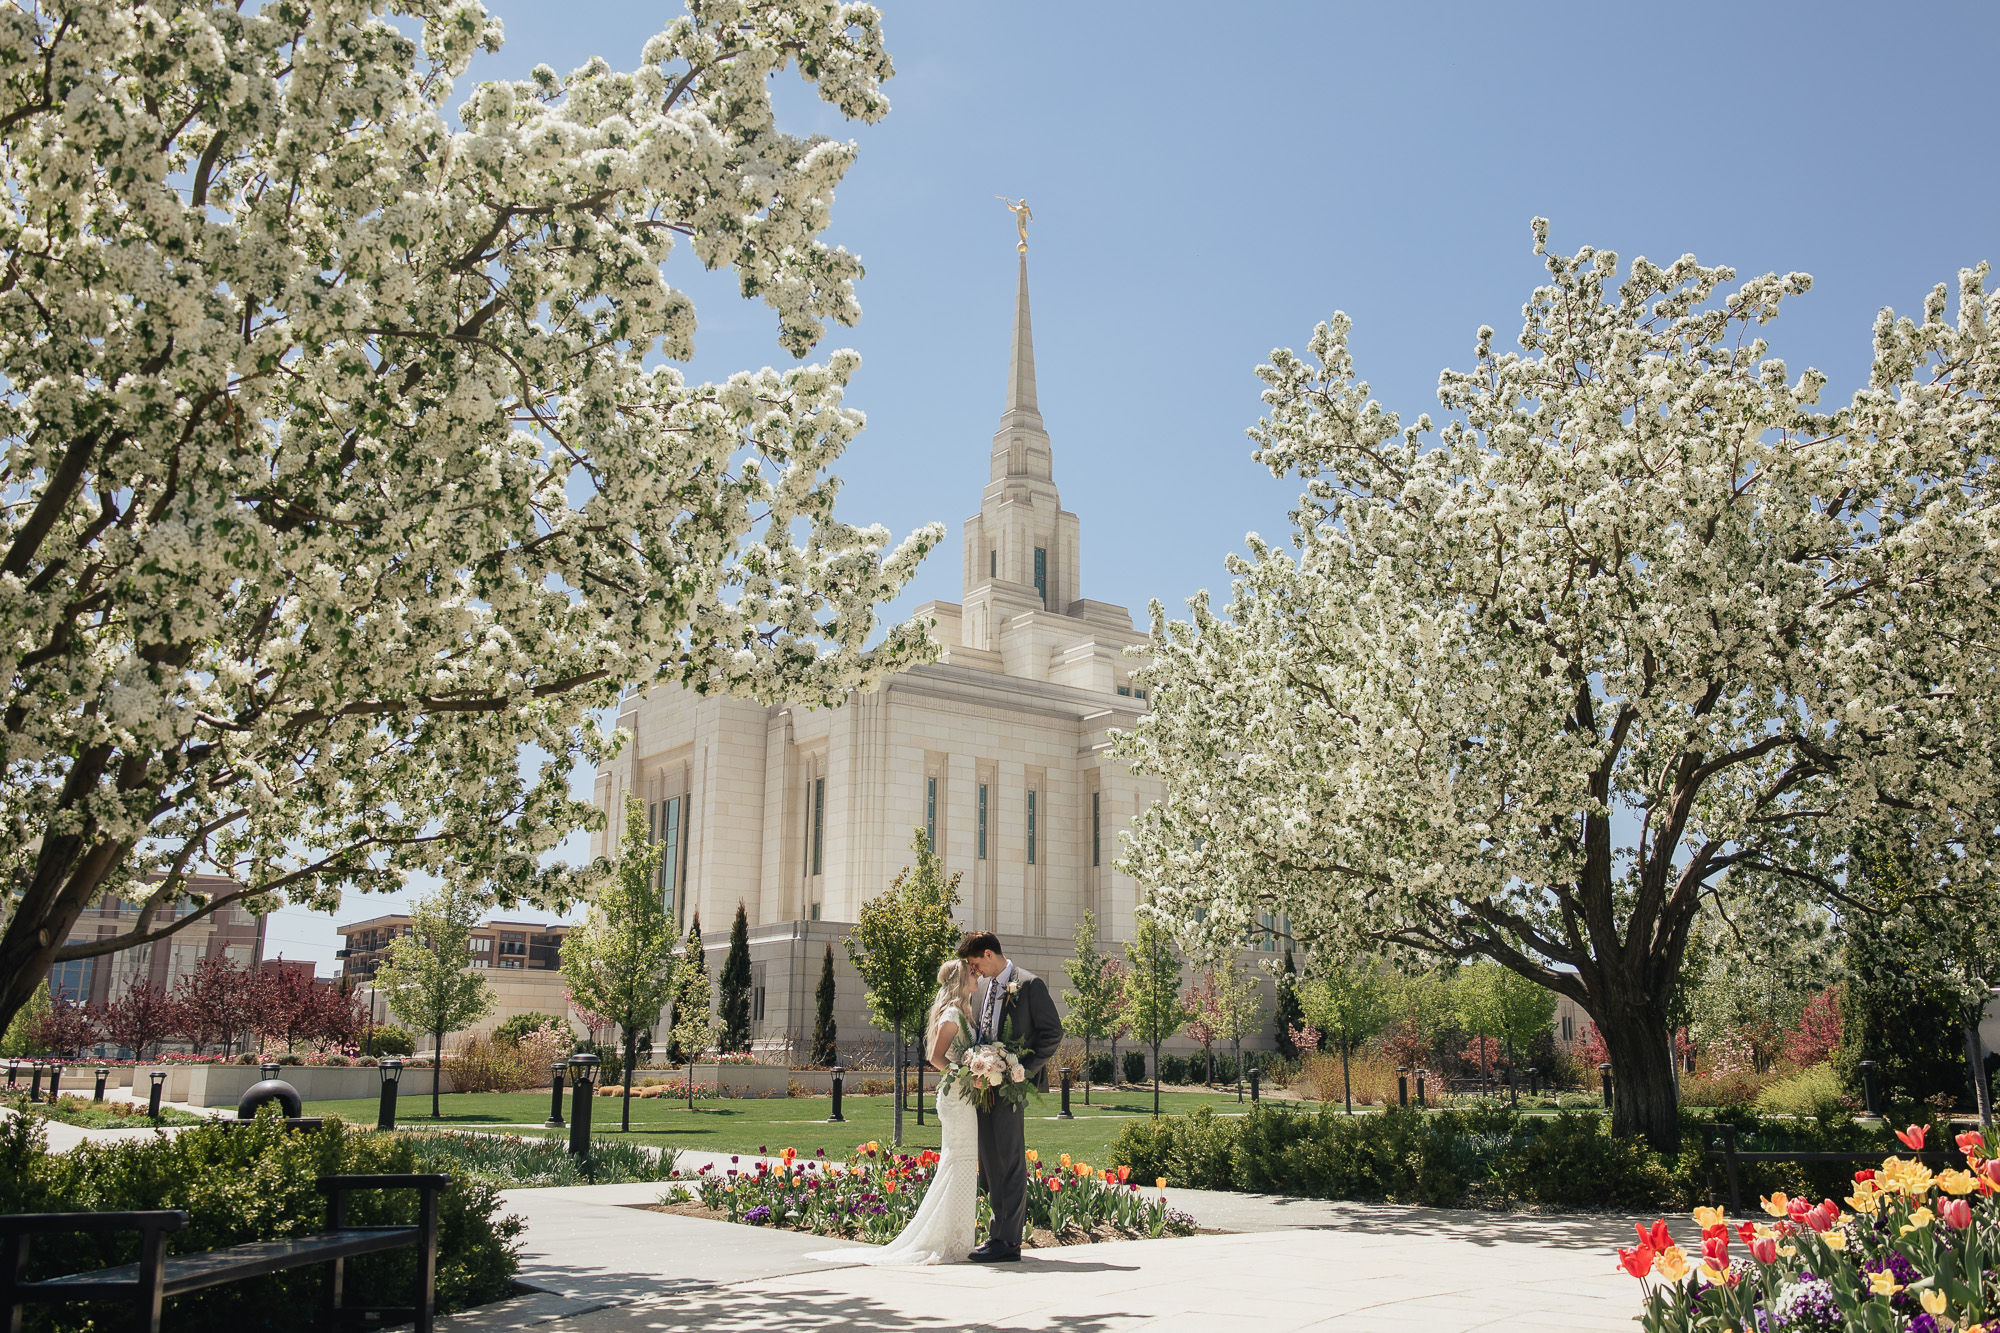 Jacob & Grace’s Ogden Temple and Grand View Reception Center Spring Wedding